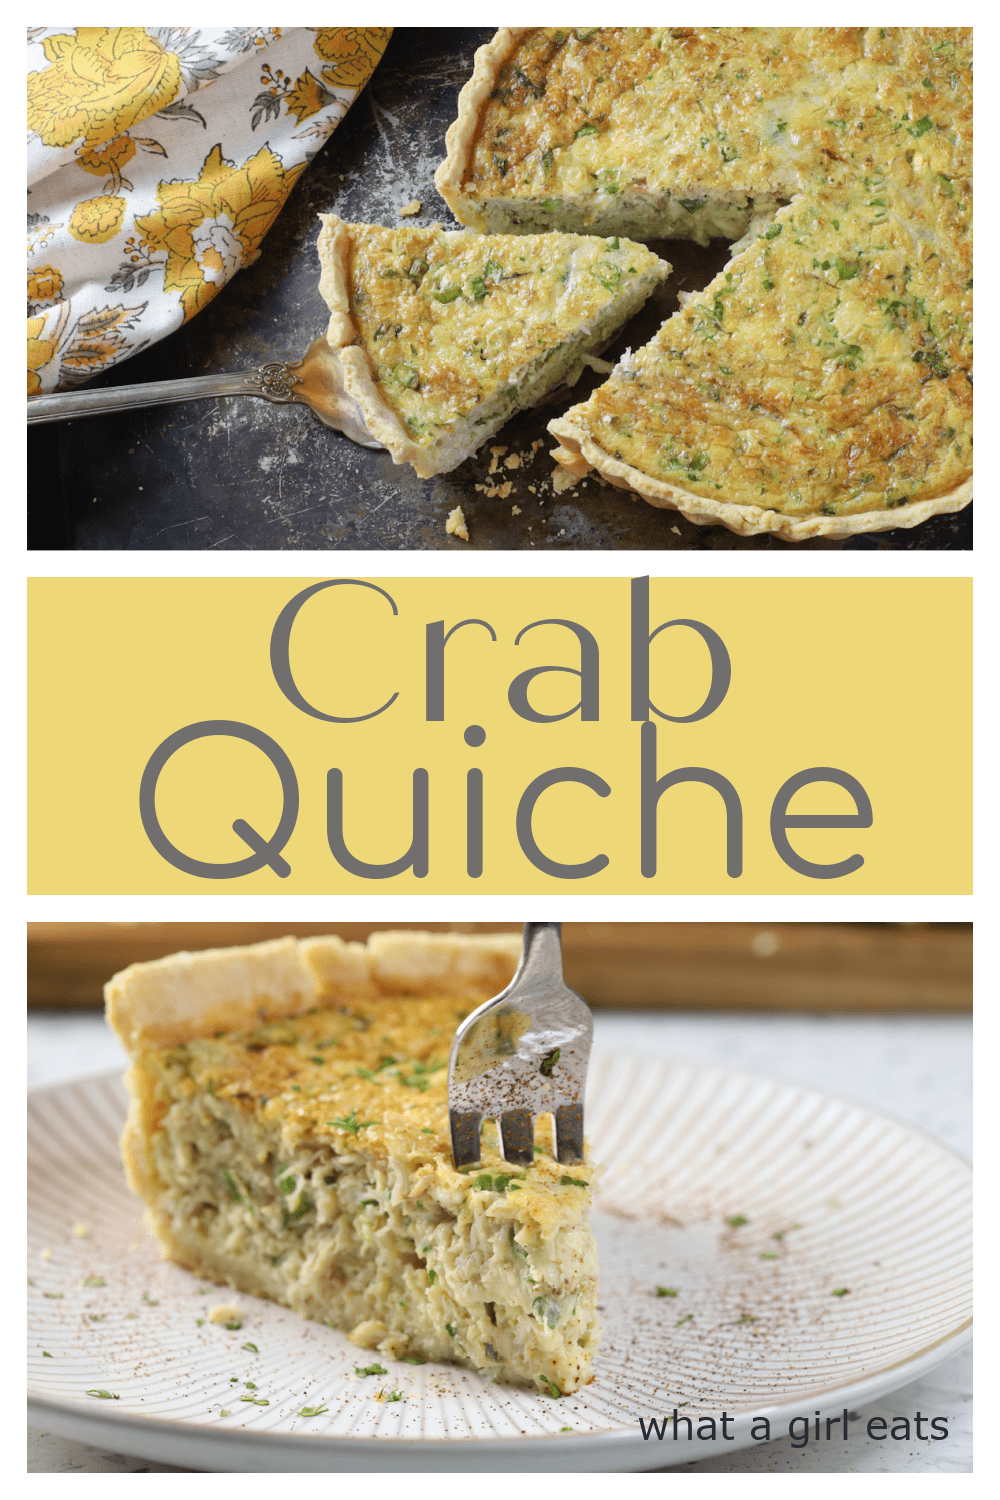 Crab quiche is rich and creamy with lots of real crab meat and a hint of spice. It's perfect for brunches or and elegant lunch.